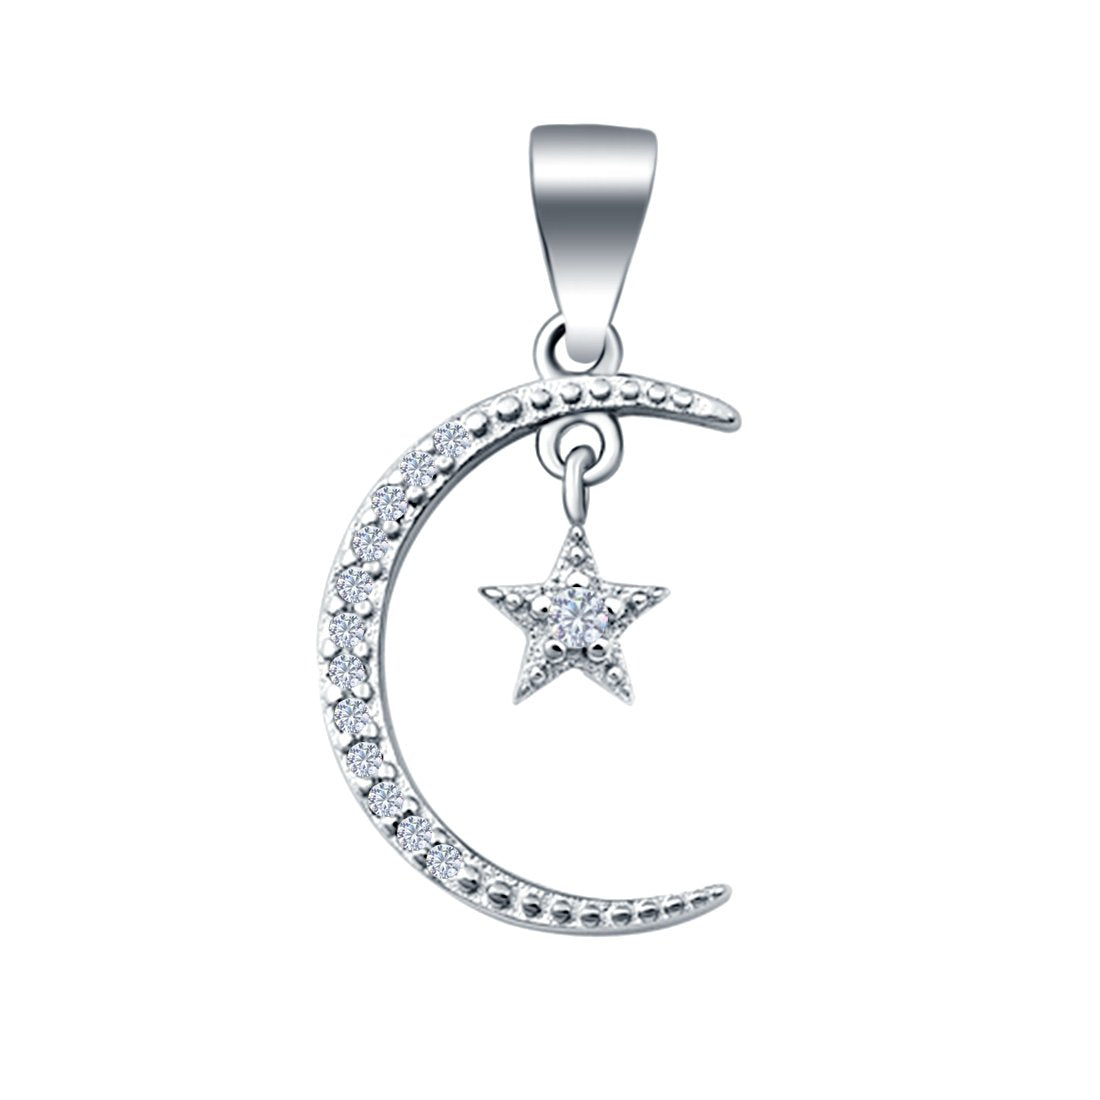 Moon and Dangling Star Charm Pendant Simulated Cubic Zirconia 925 Sterling Silver